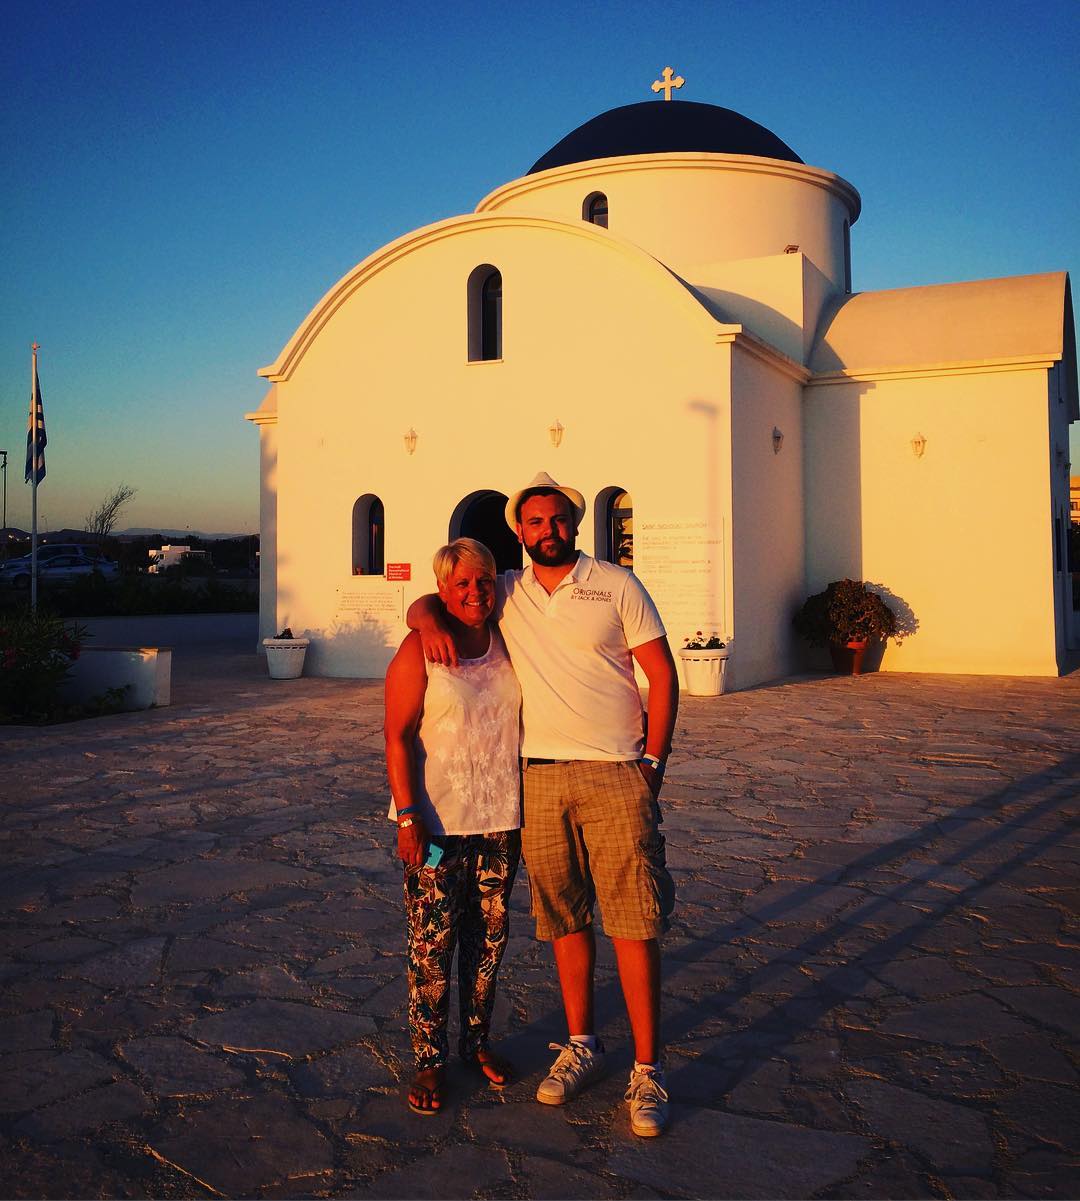 Watching the sunset from the church #hot #sunset #paphos #church #cyprus #paphos